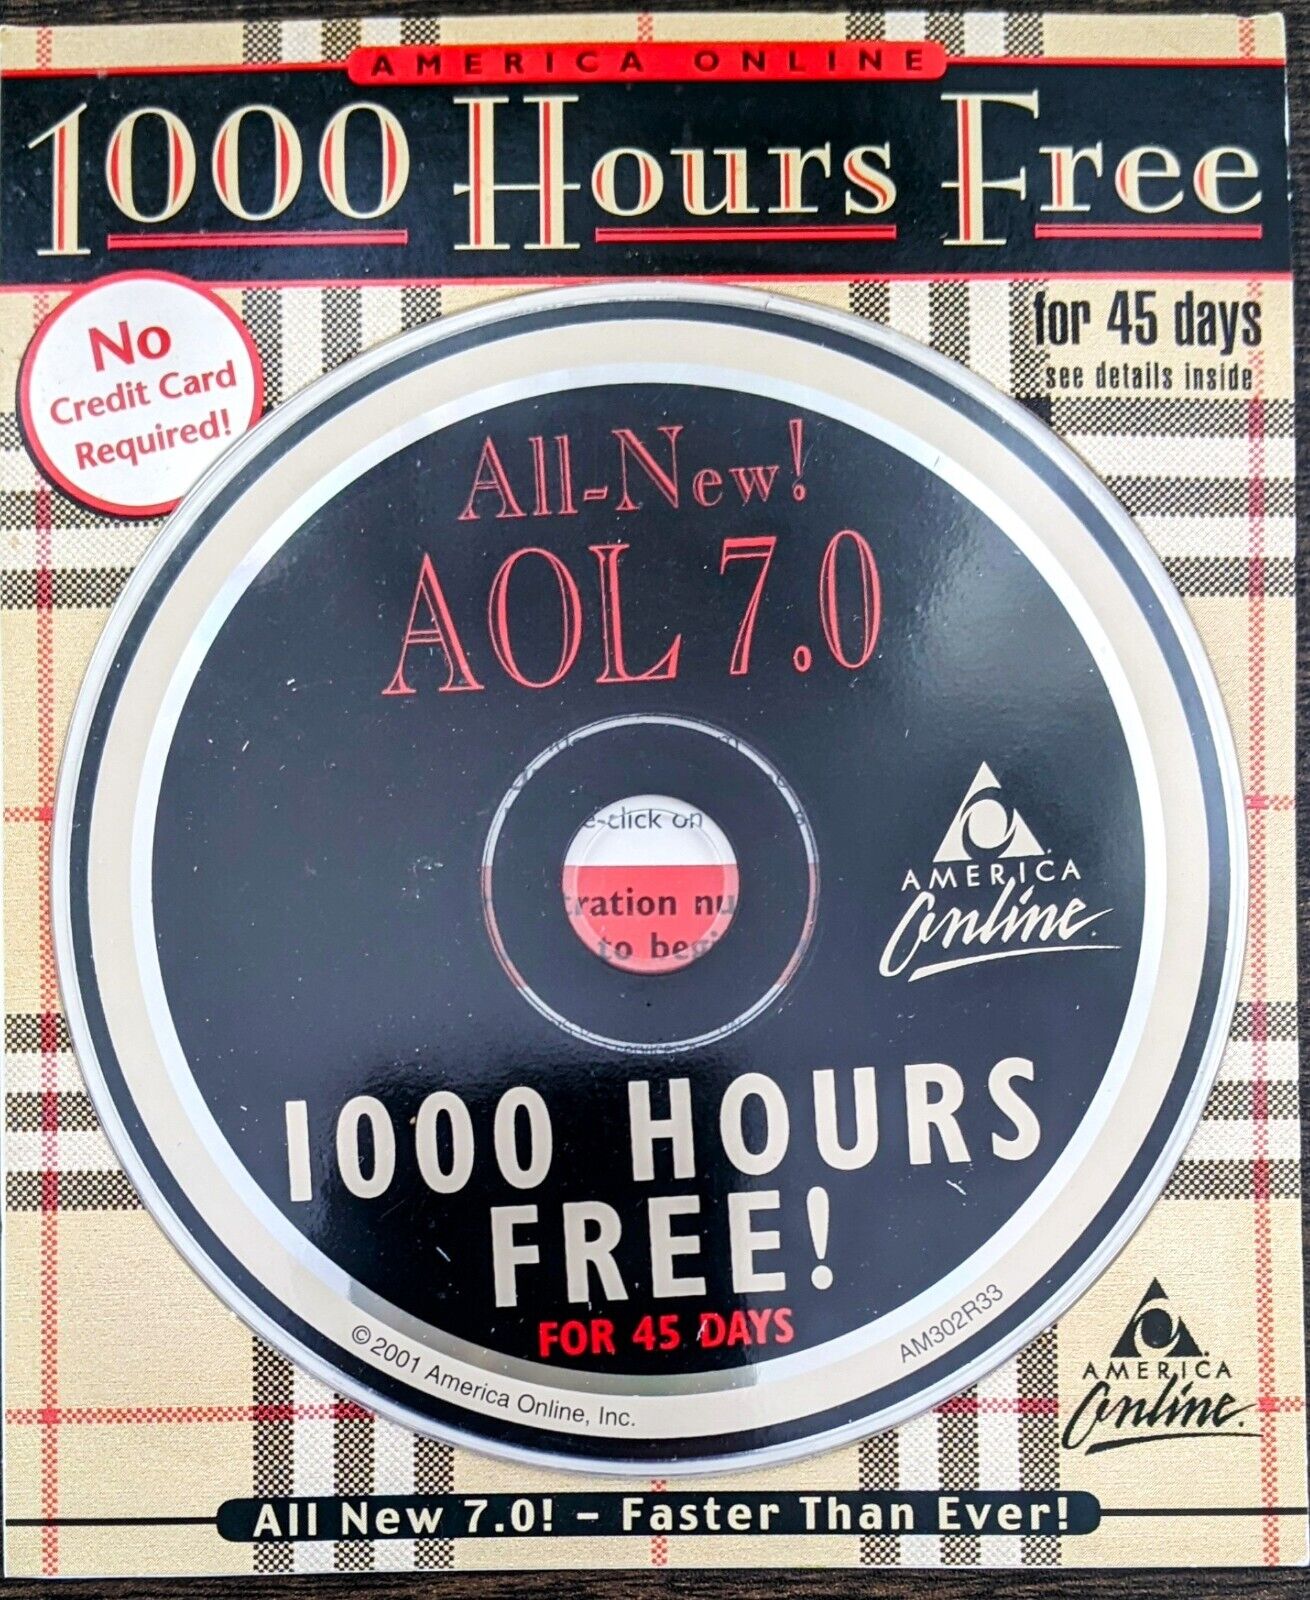 PLAID America Online Collectible / Install Disc, AOL CD v7.0, Rare